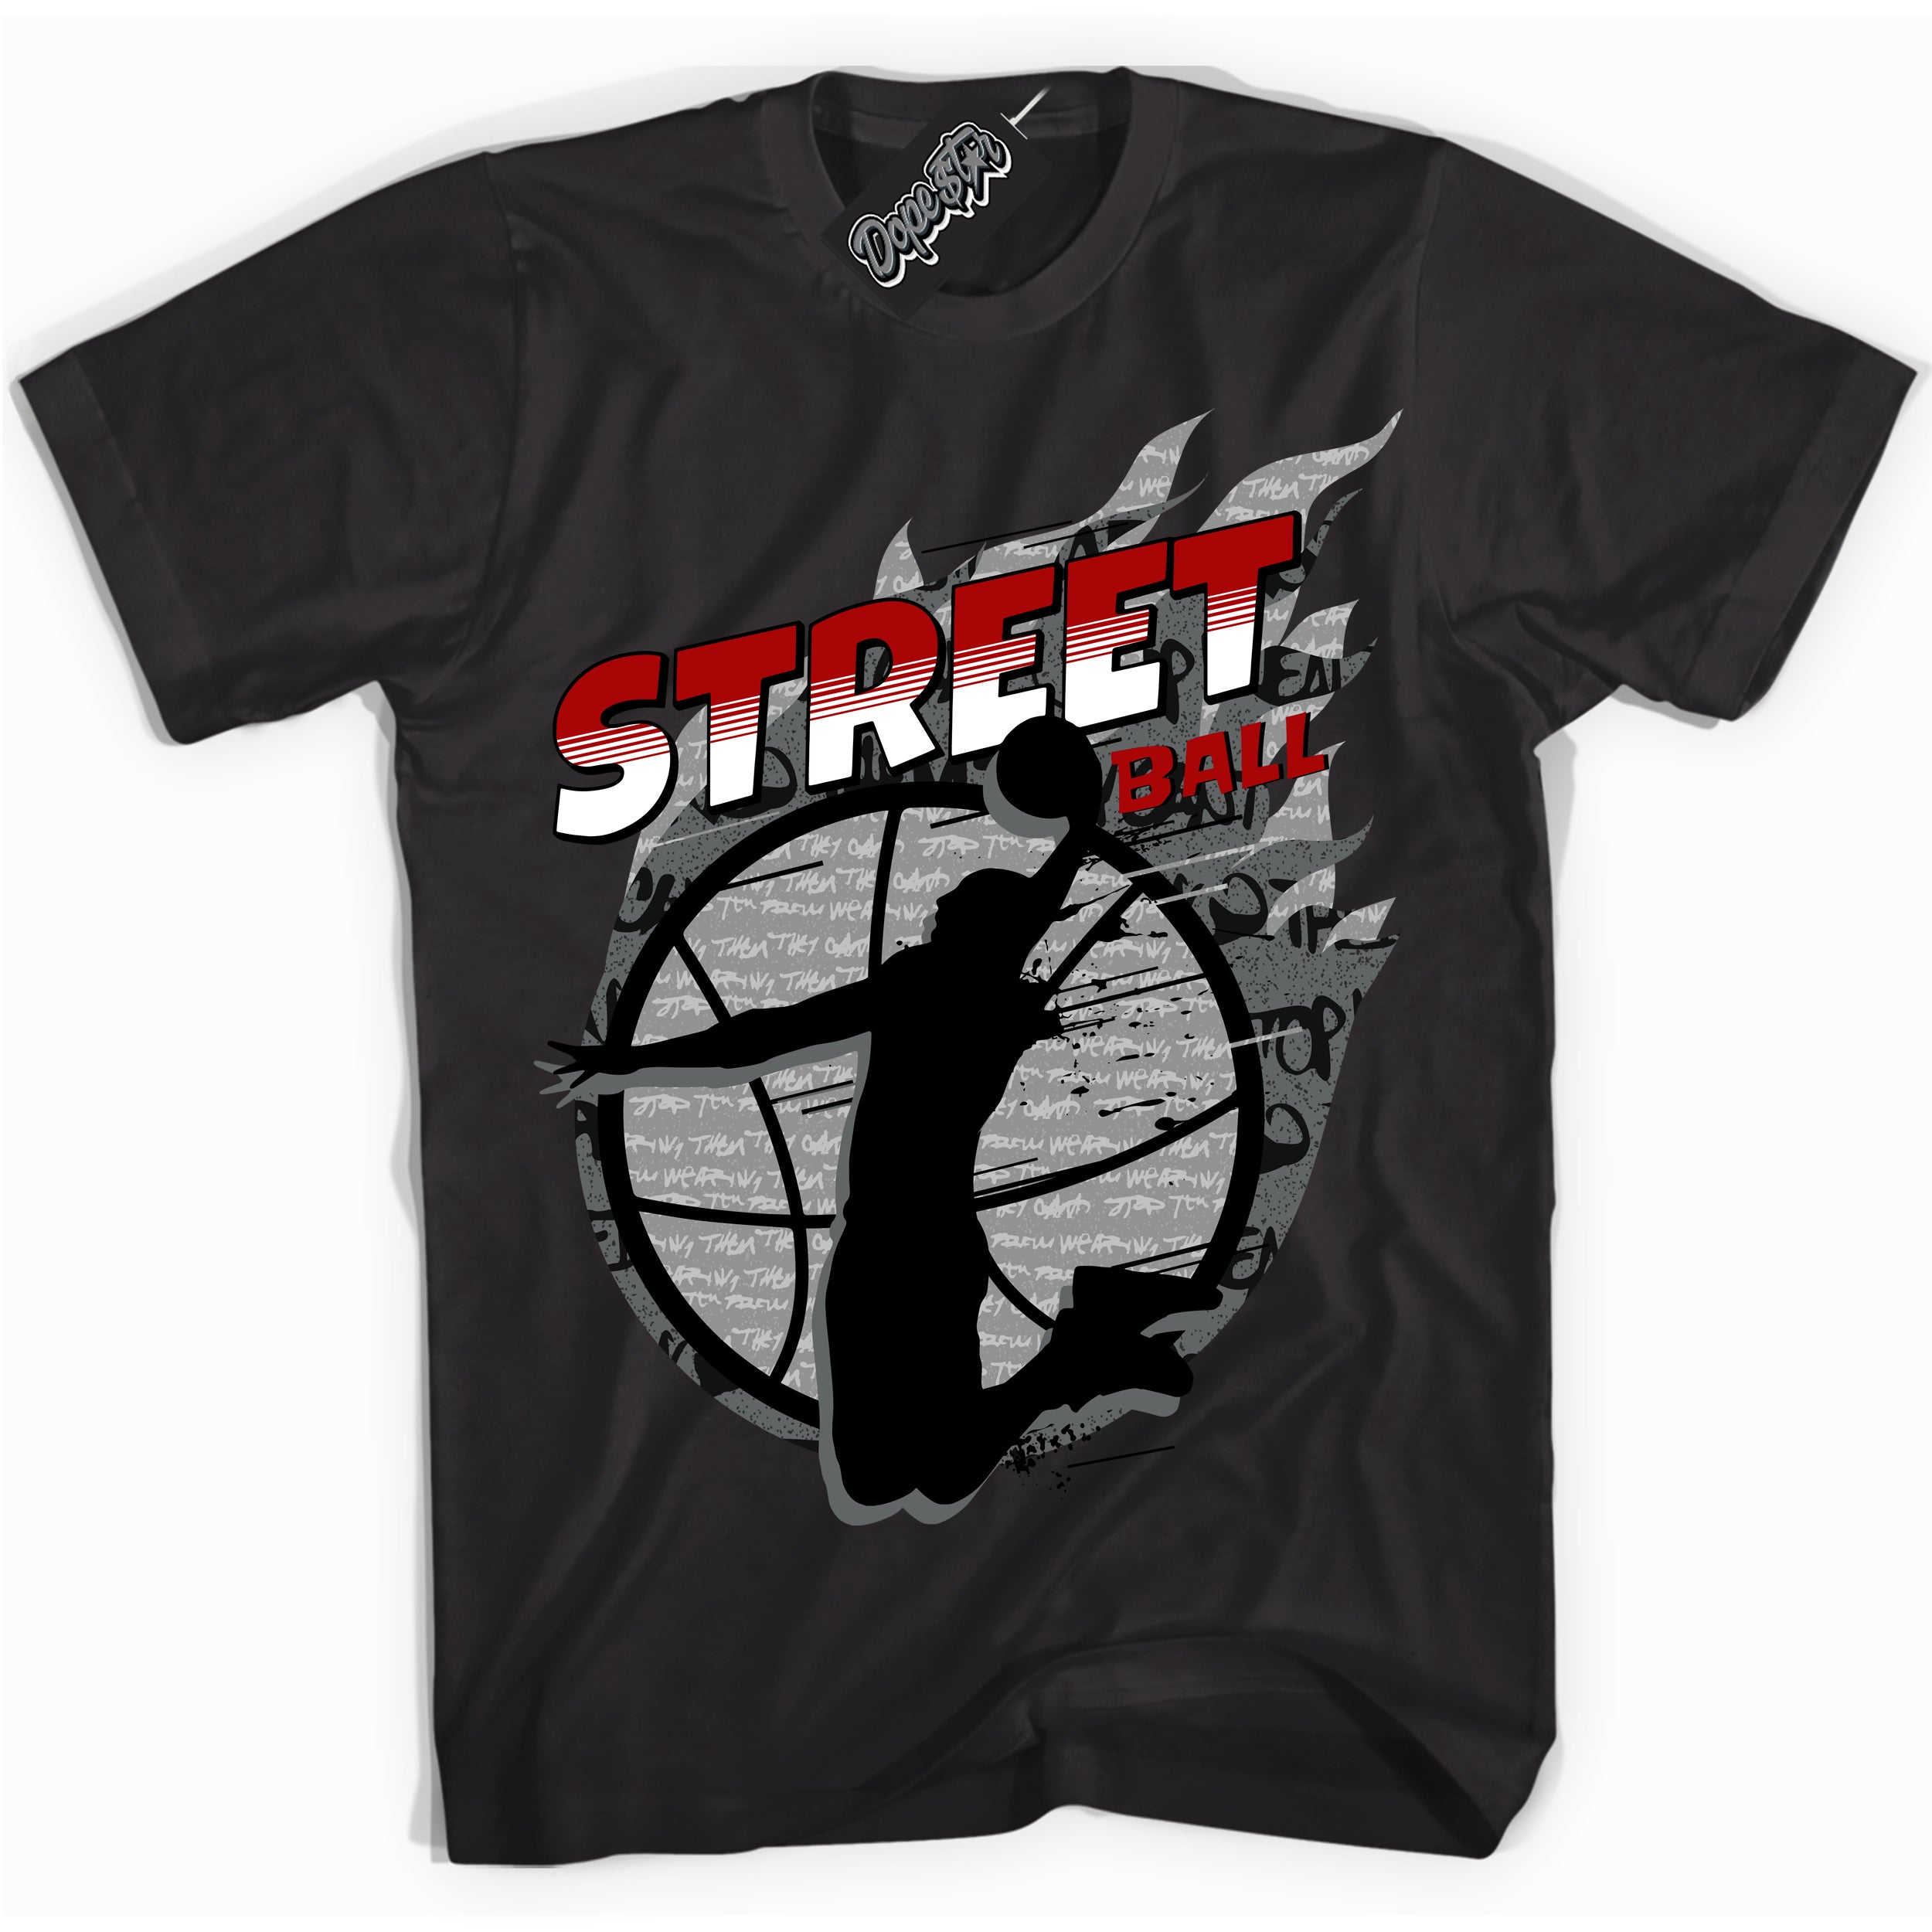 Cool Black Shirt with “ Street Ball ” design that perfectly matches Rebellionaire 1s Sneakers.